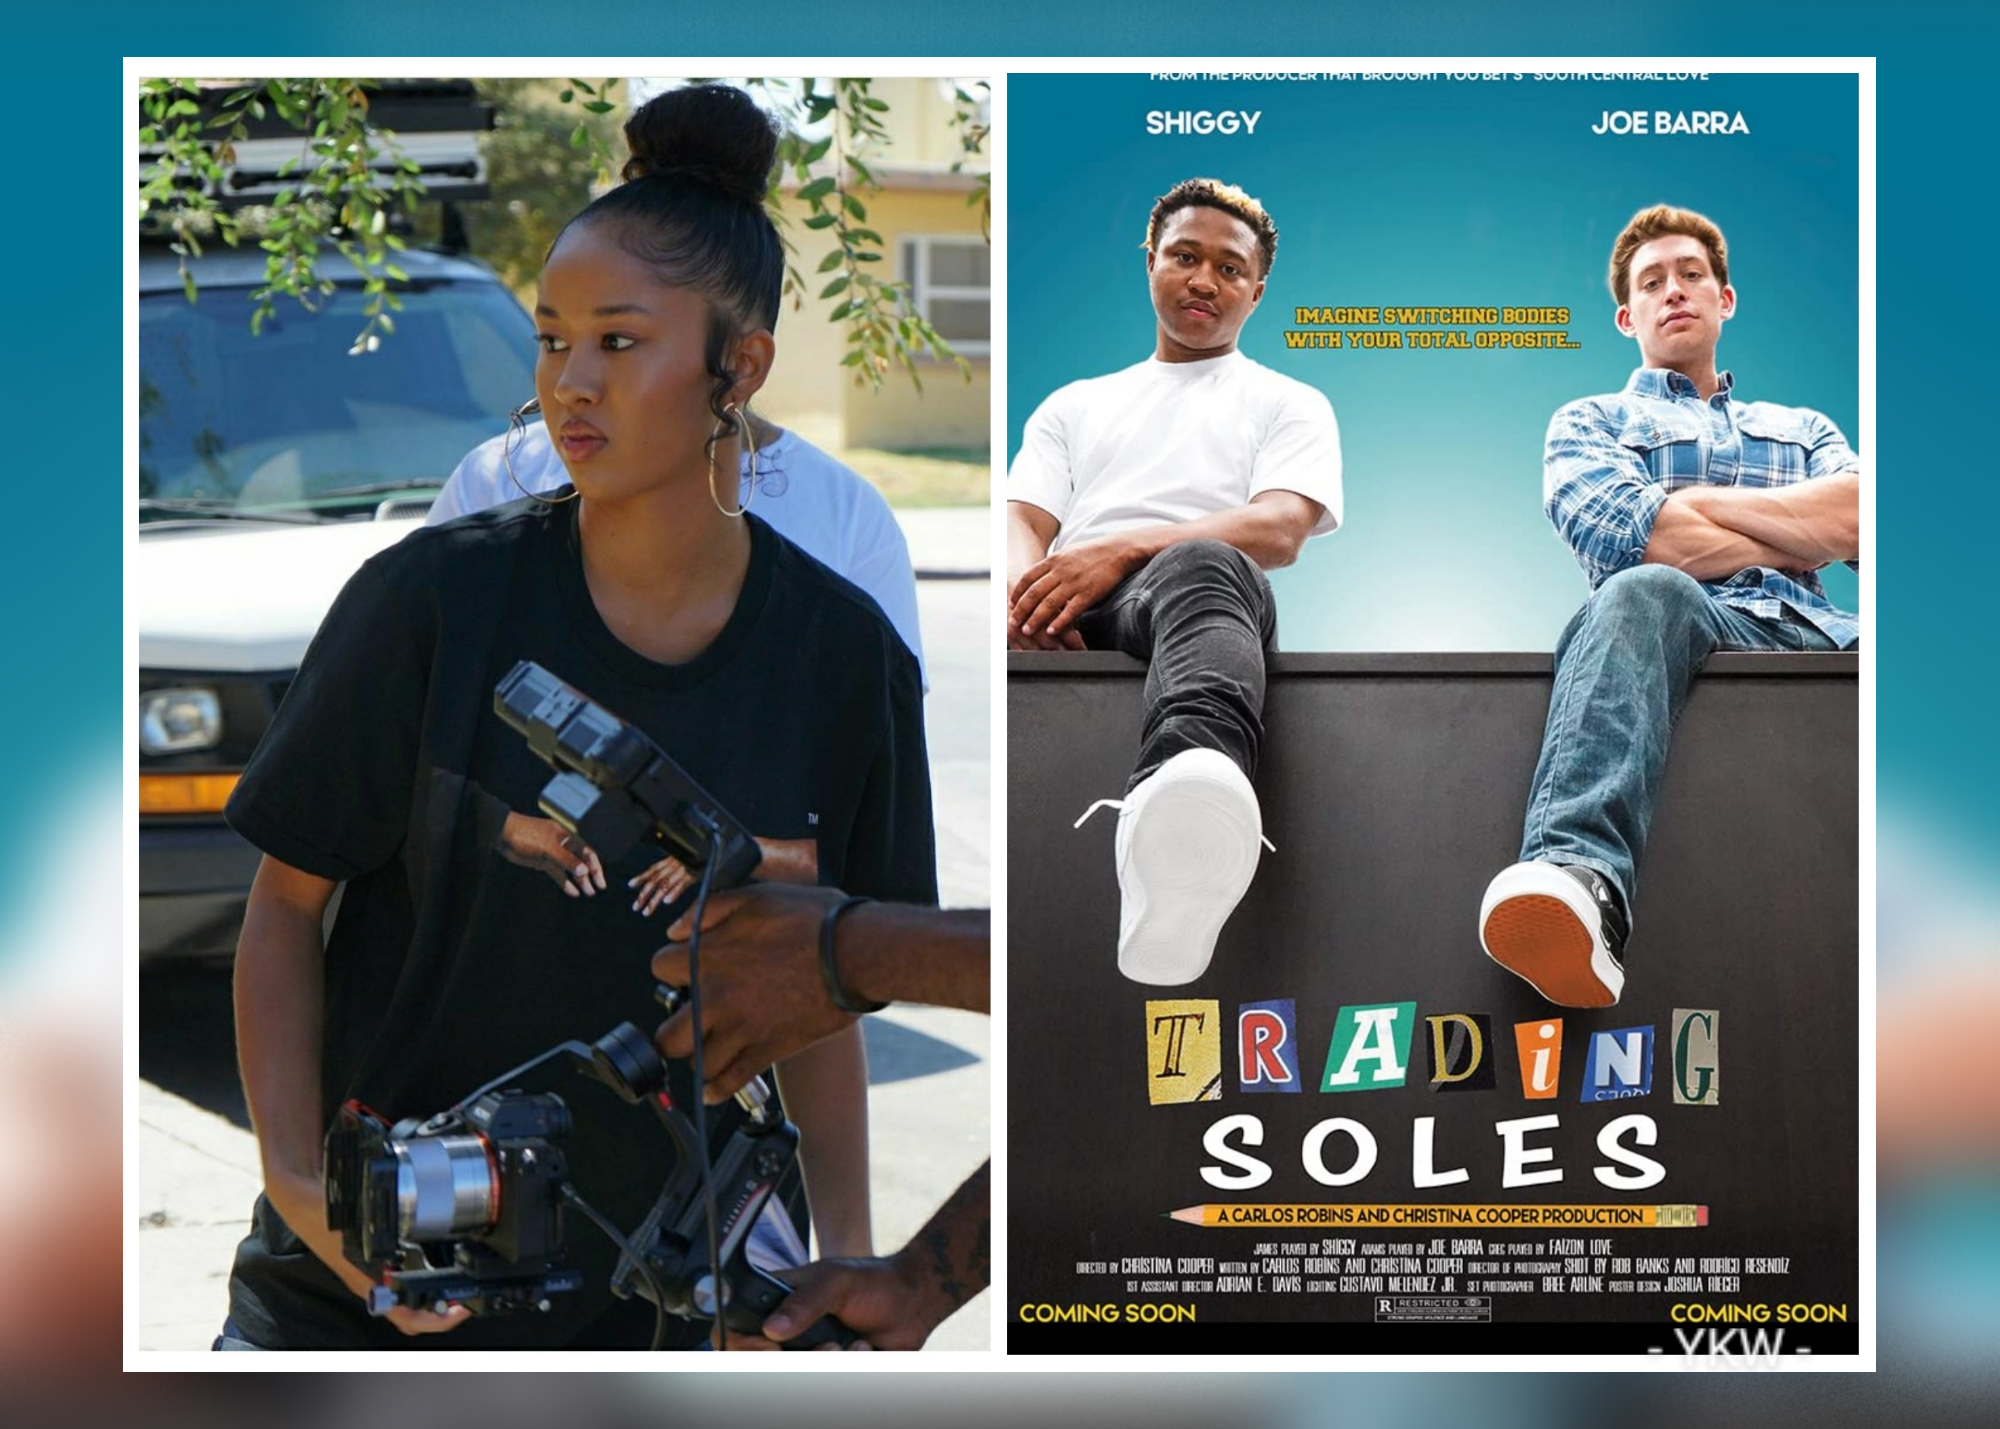 Christina Cooper Directs New Film “Trading Soles”